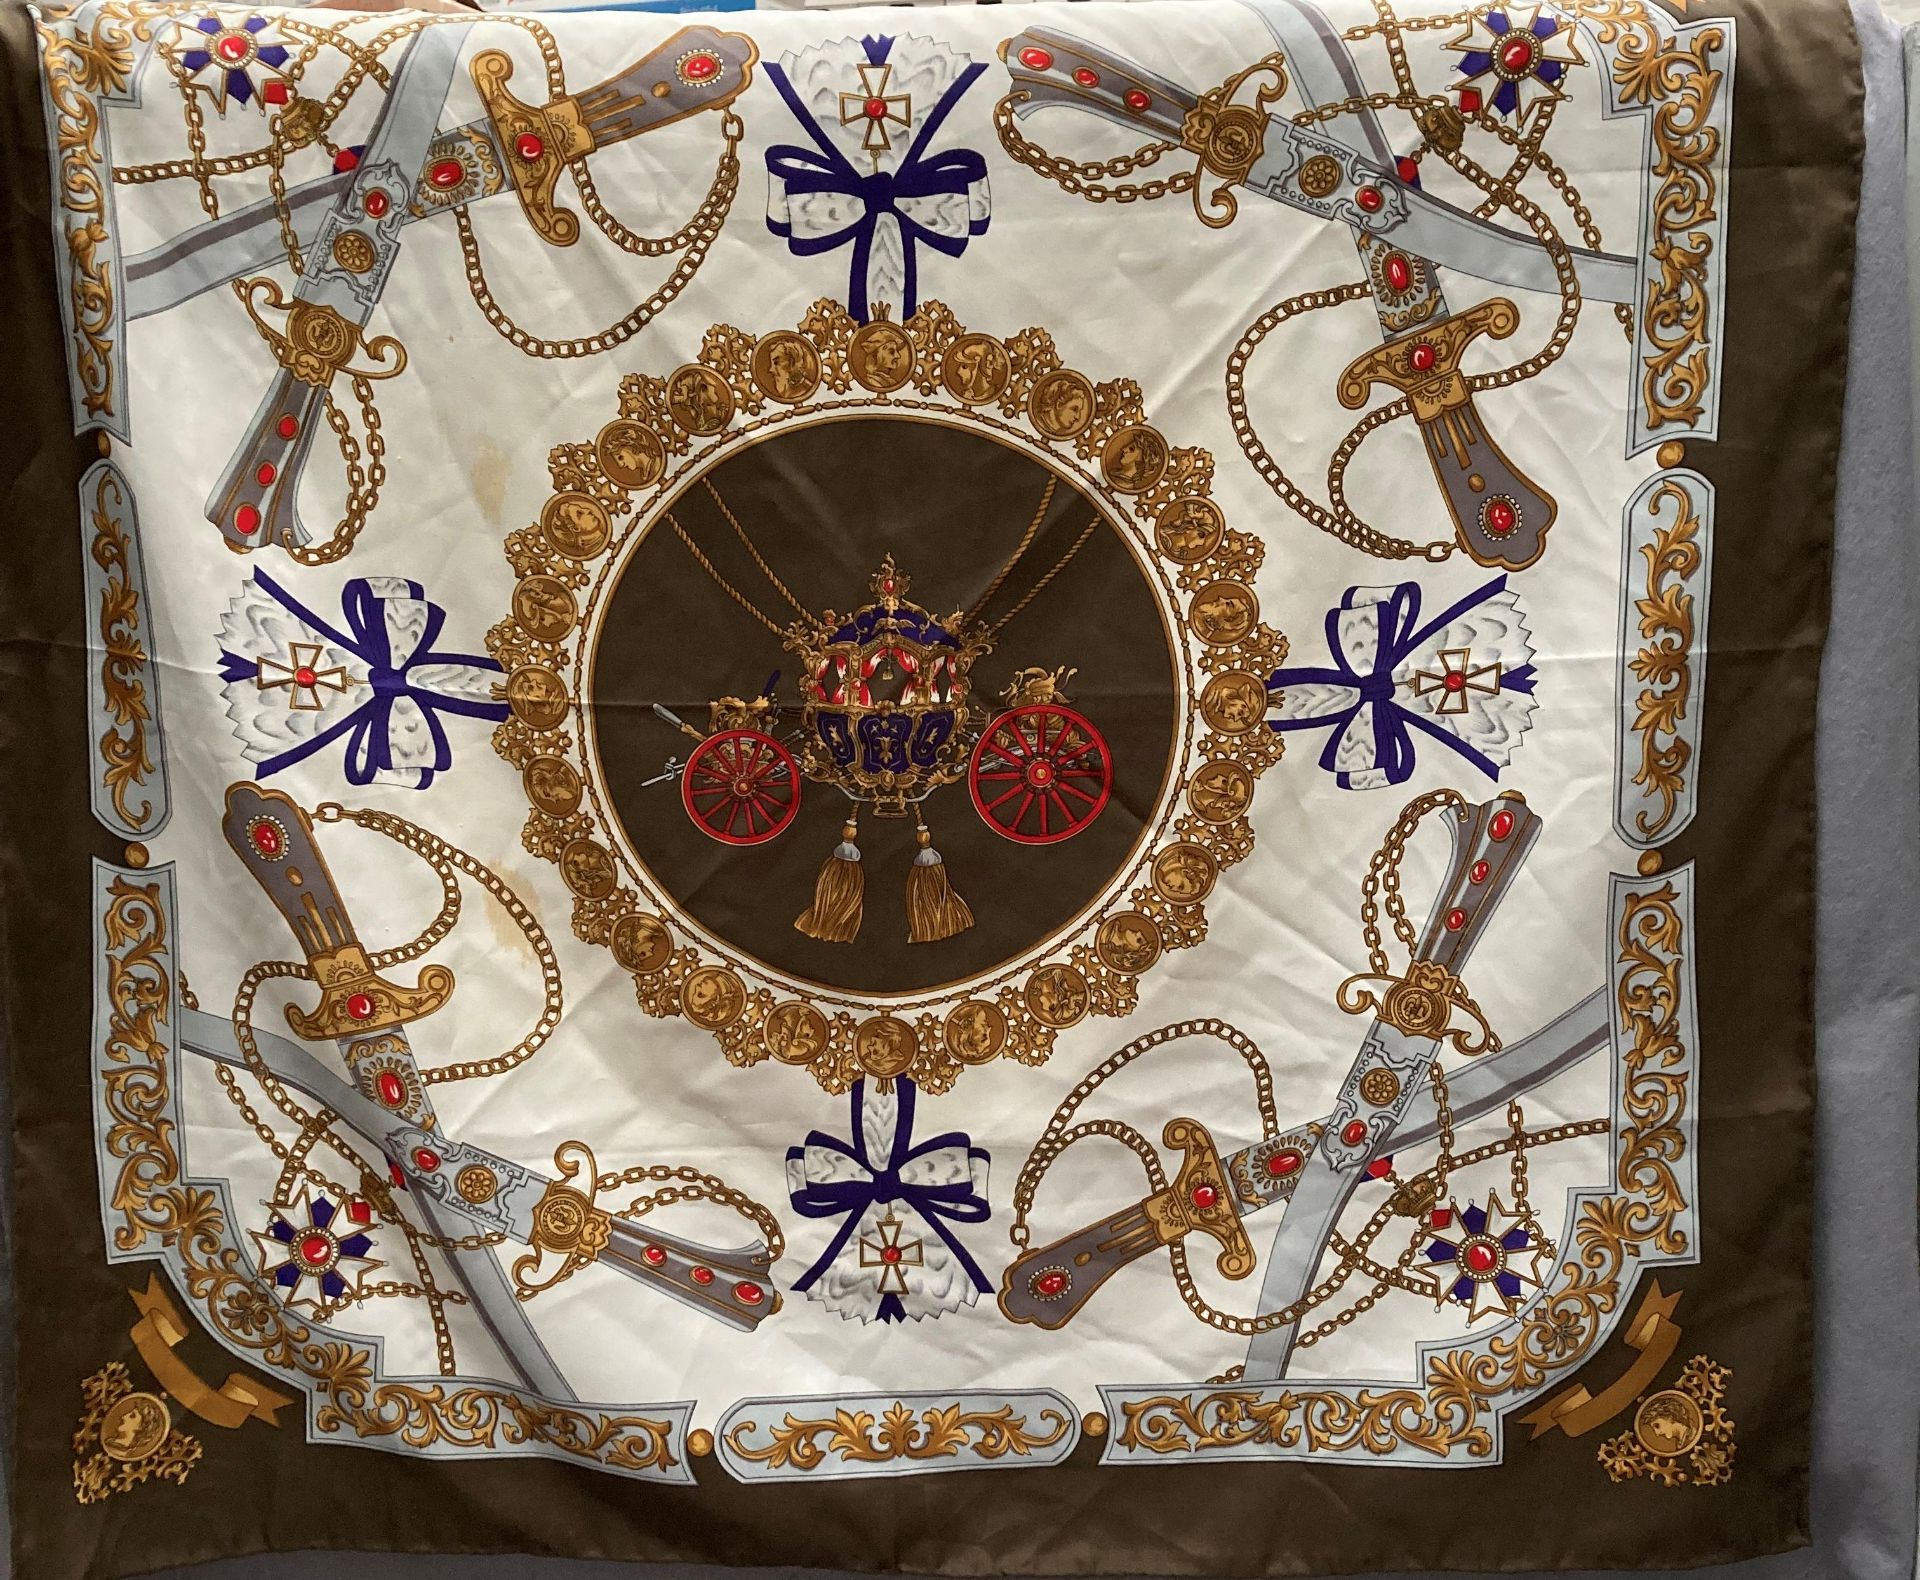 Five heraldic design etc. silk scarves by Matinto, etc. - Image 2 of 7